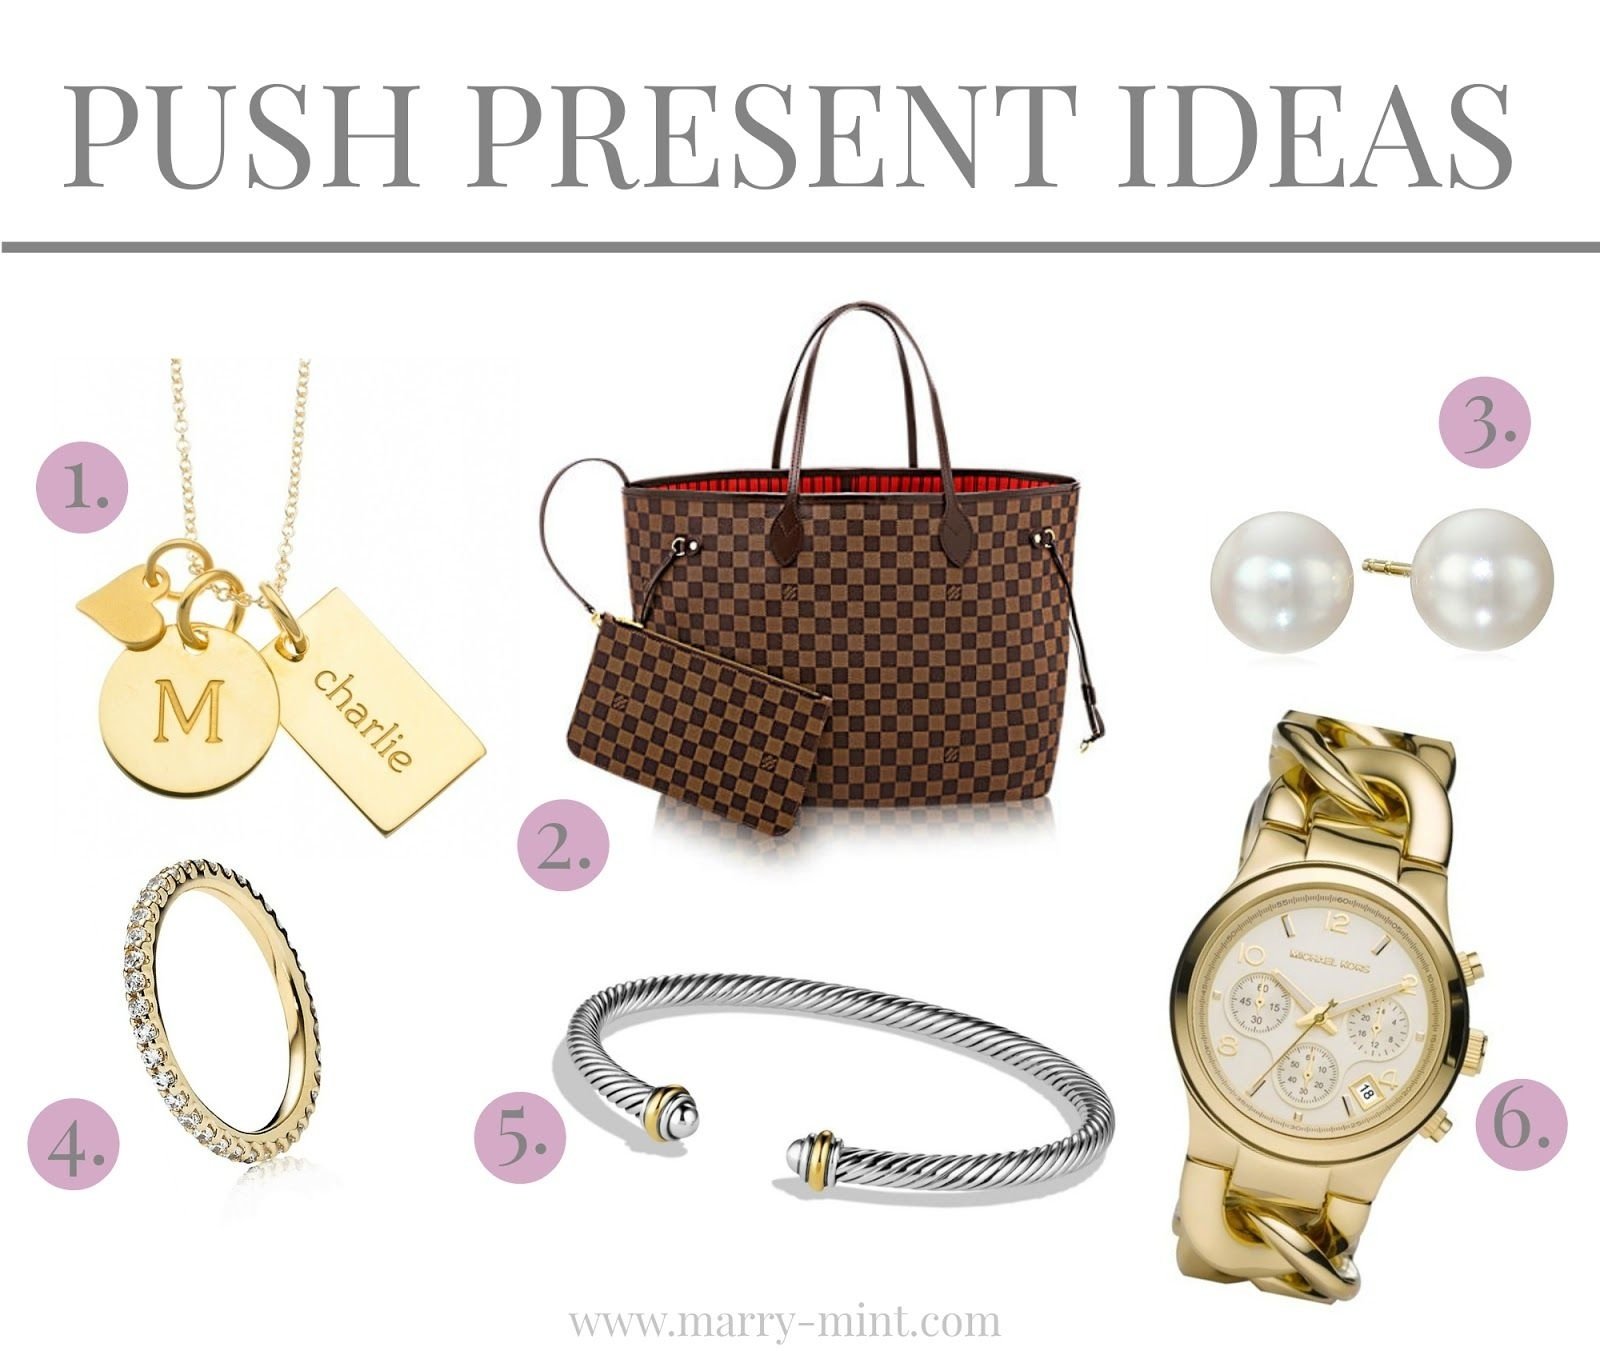 10 Awesome Push Gift Ideas For Wife 2020